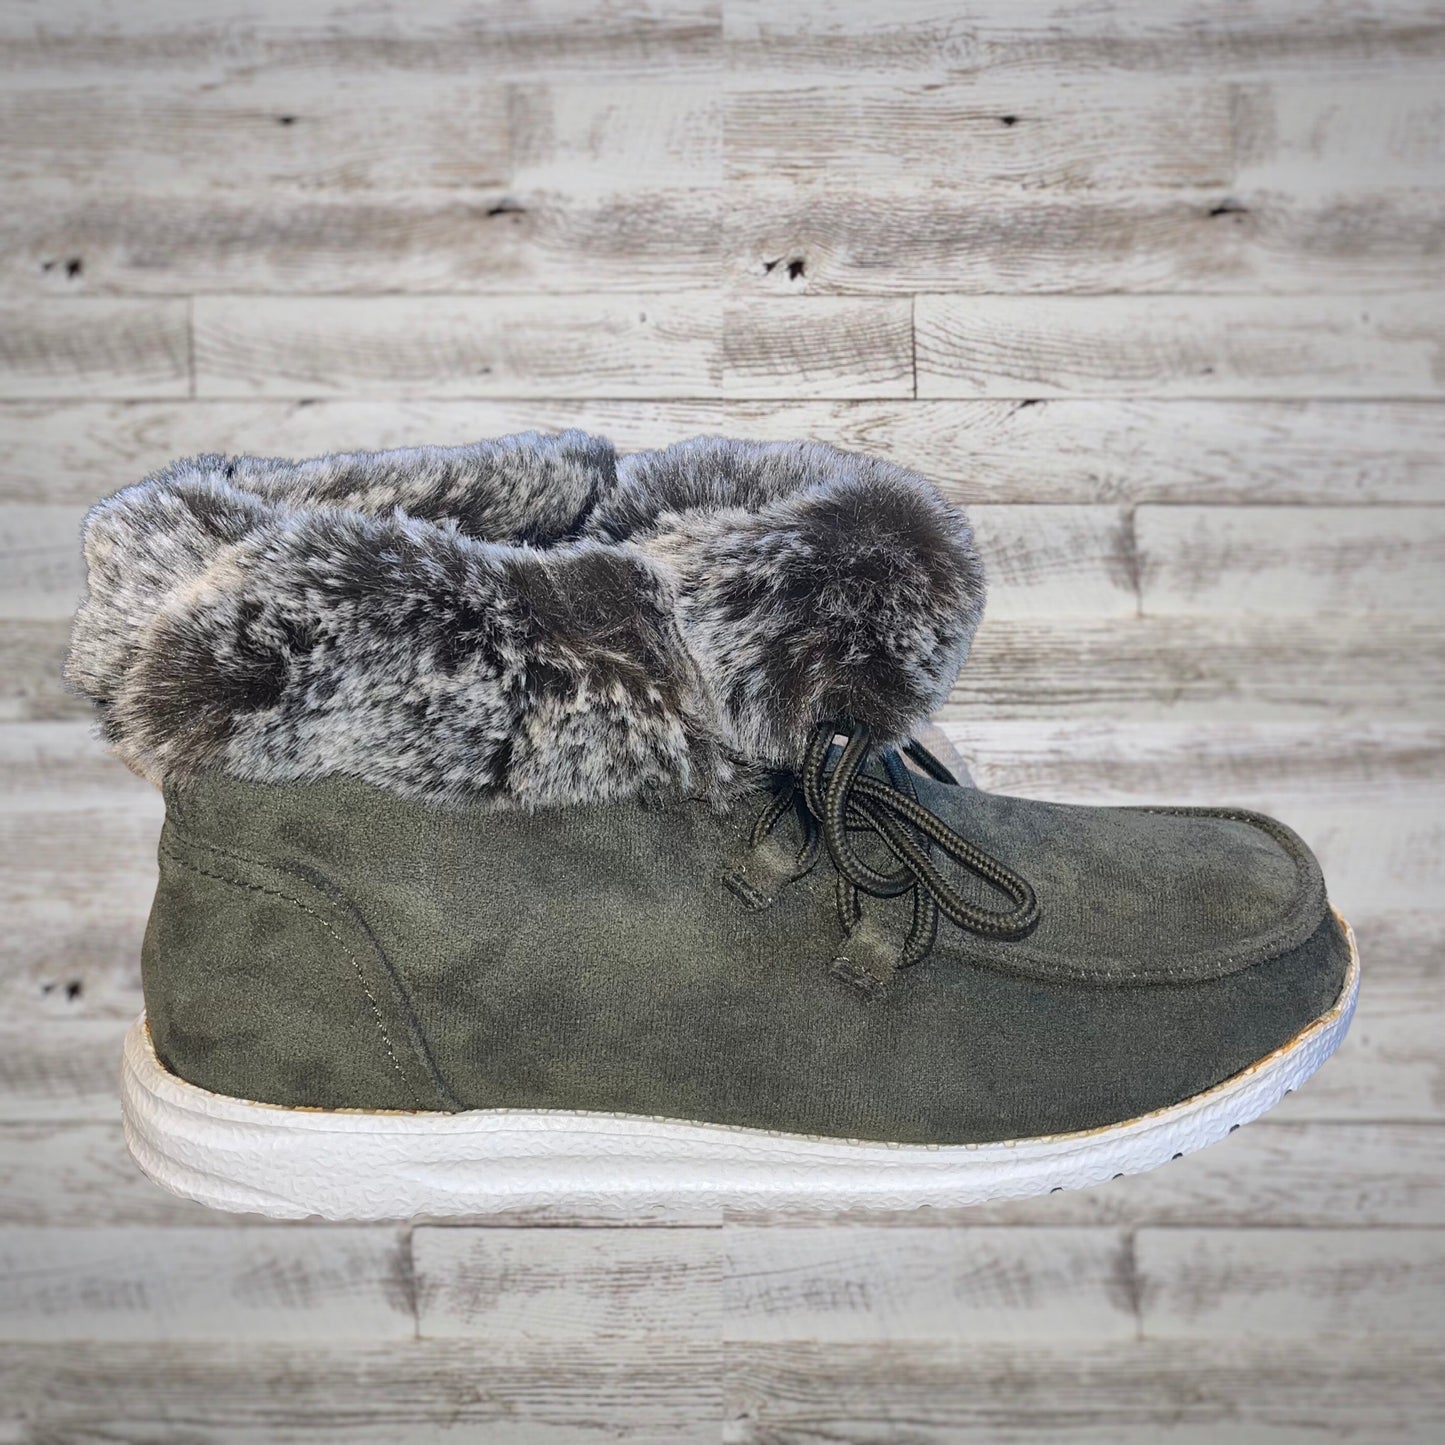 Gypsy Jazz Fur Lined Lace Up Booties in Solid Olive